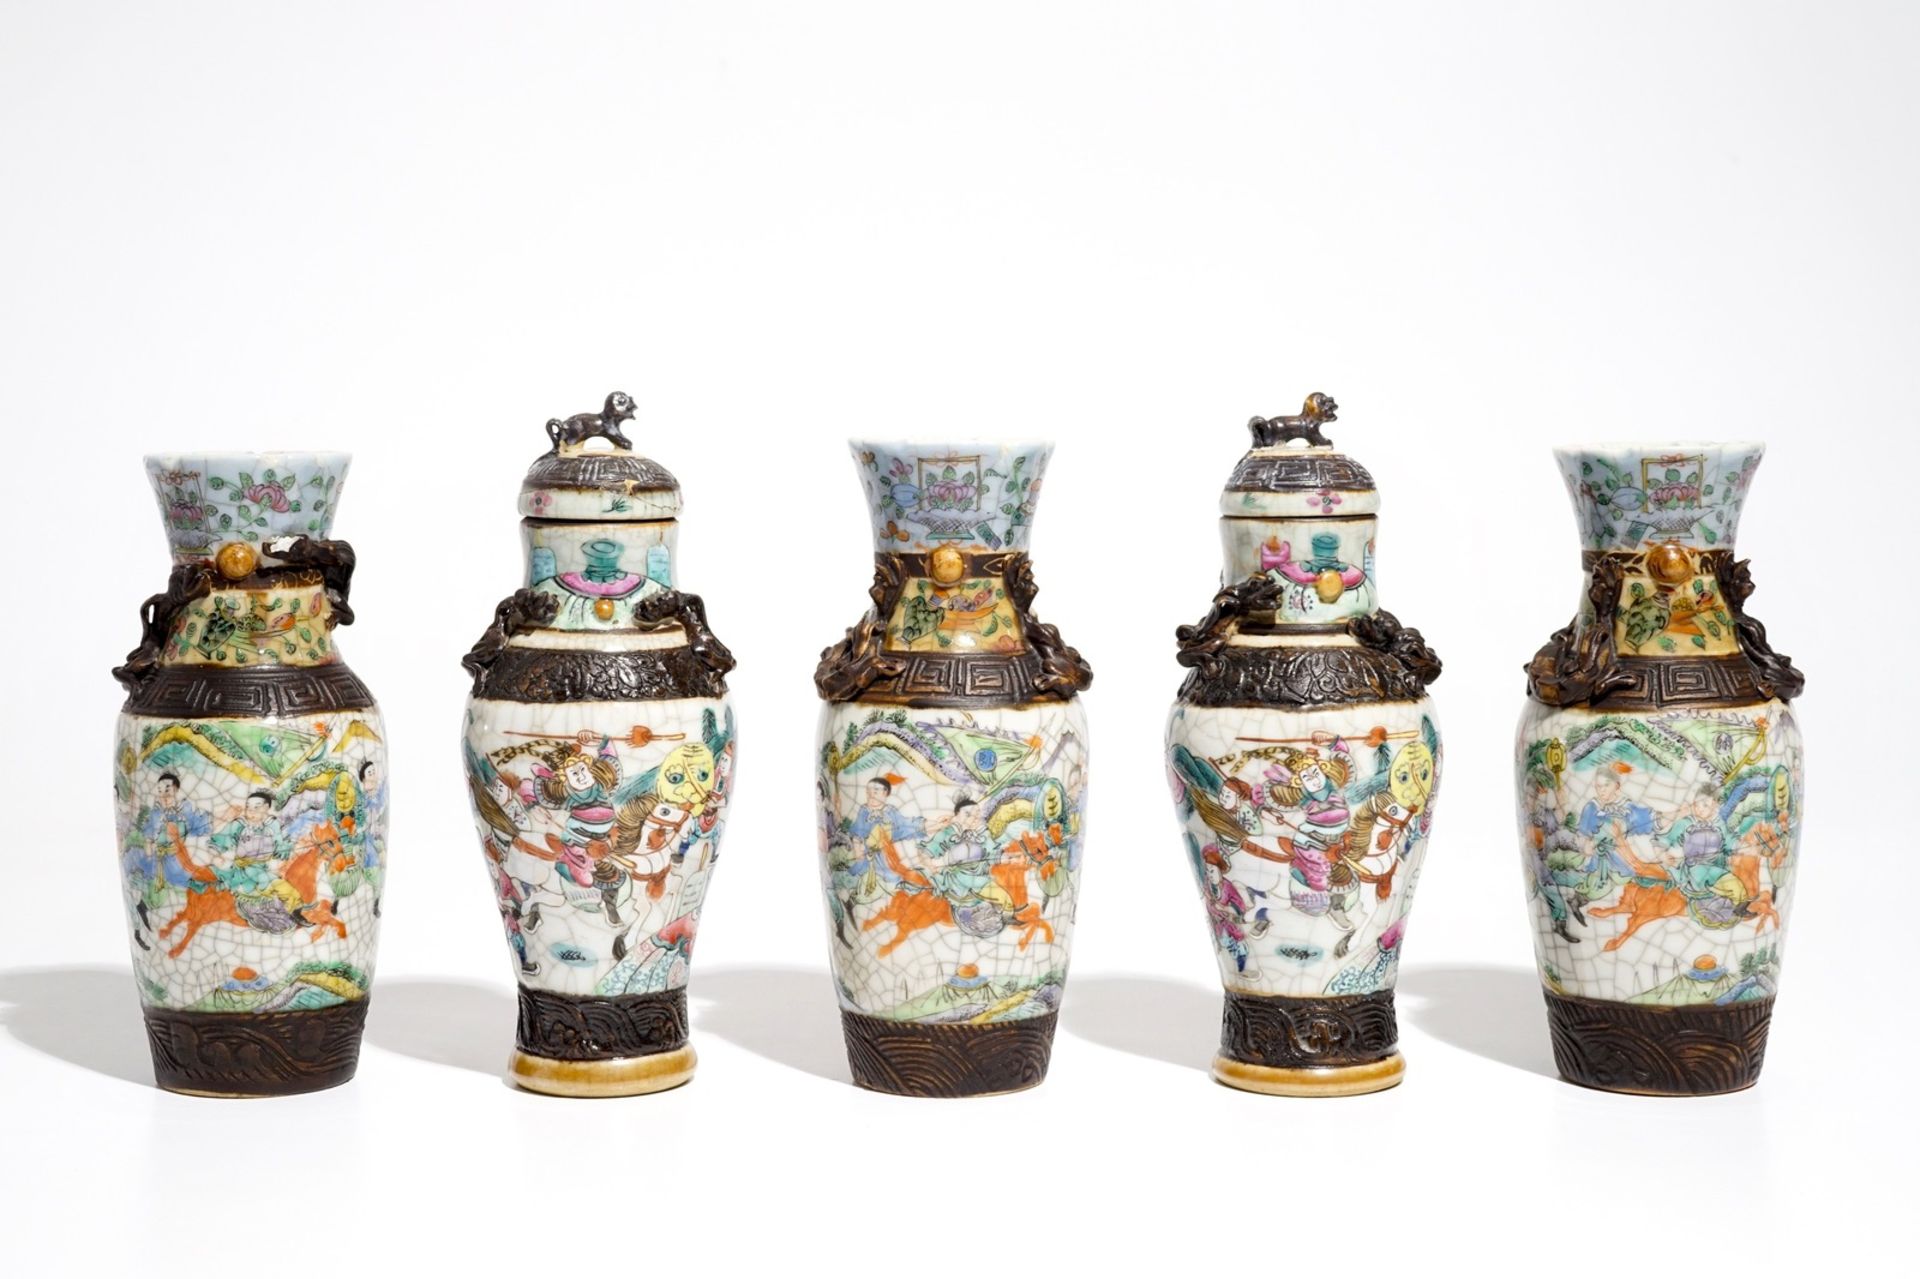 Two Chinese Nanking famille rose covered vases and three Nanking famille verte vases, 19th C.